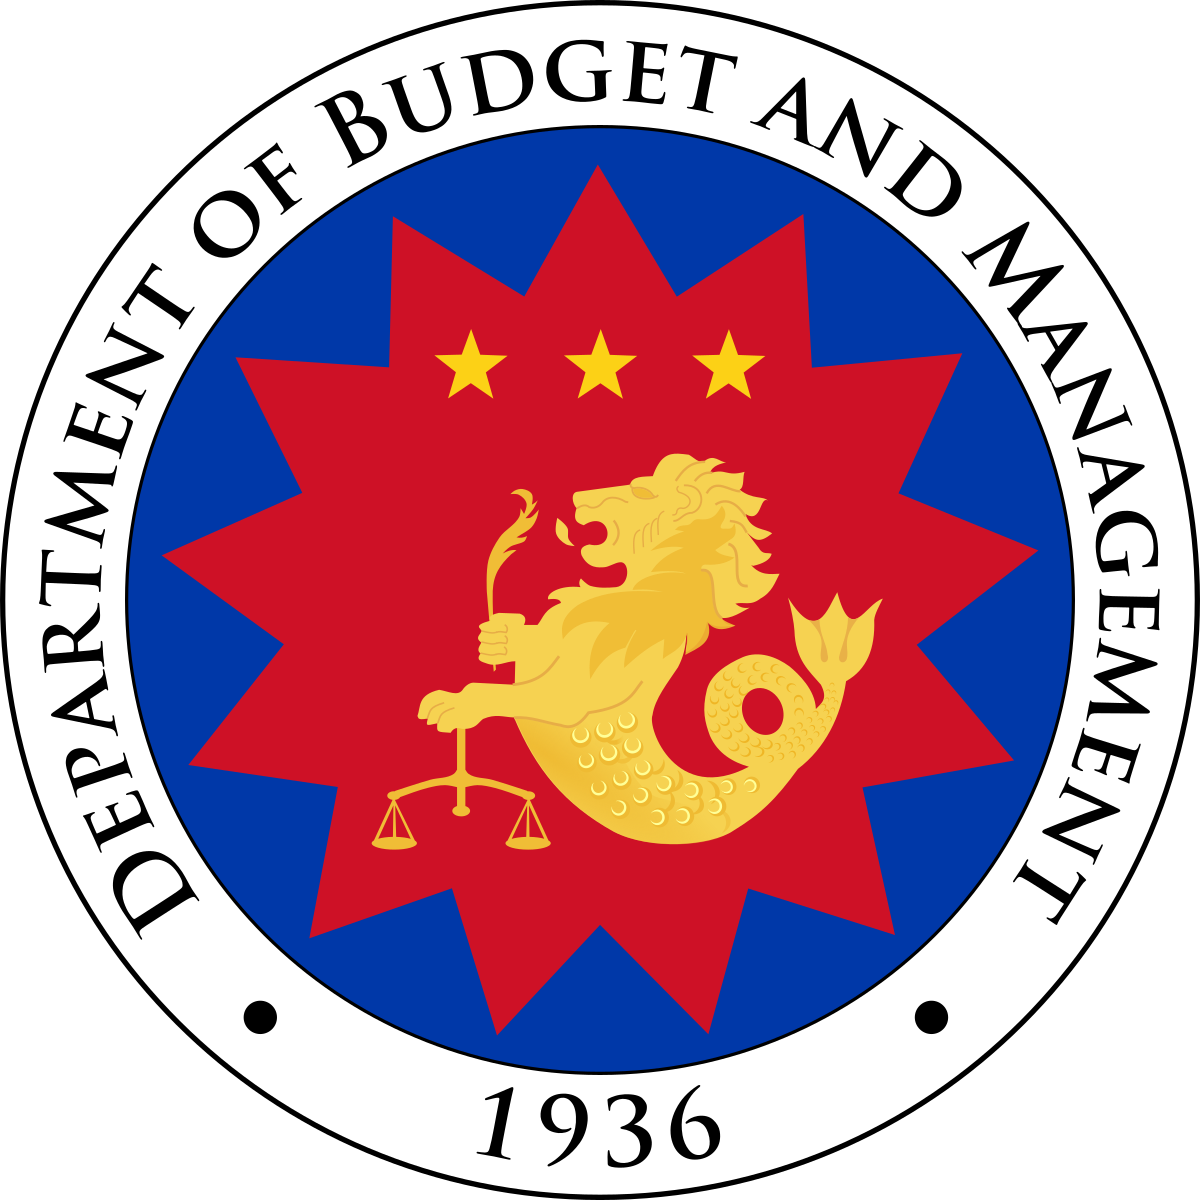 DBM owes P6 billion to state and local universities, colleges: Escudero